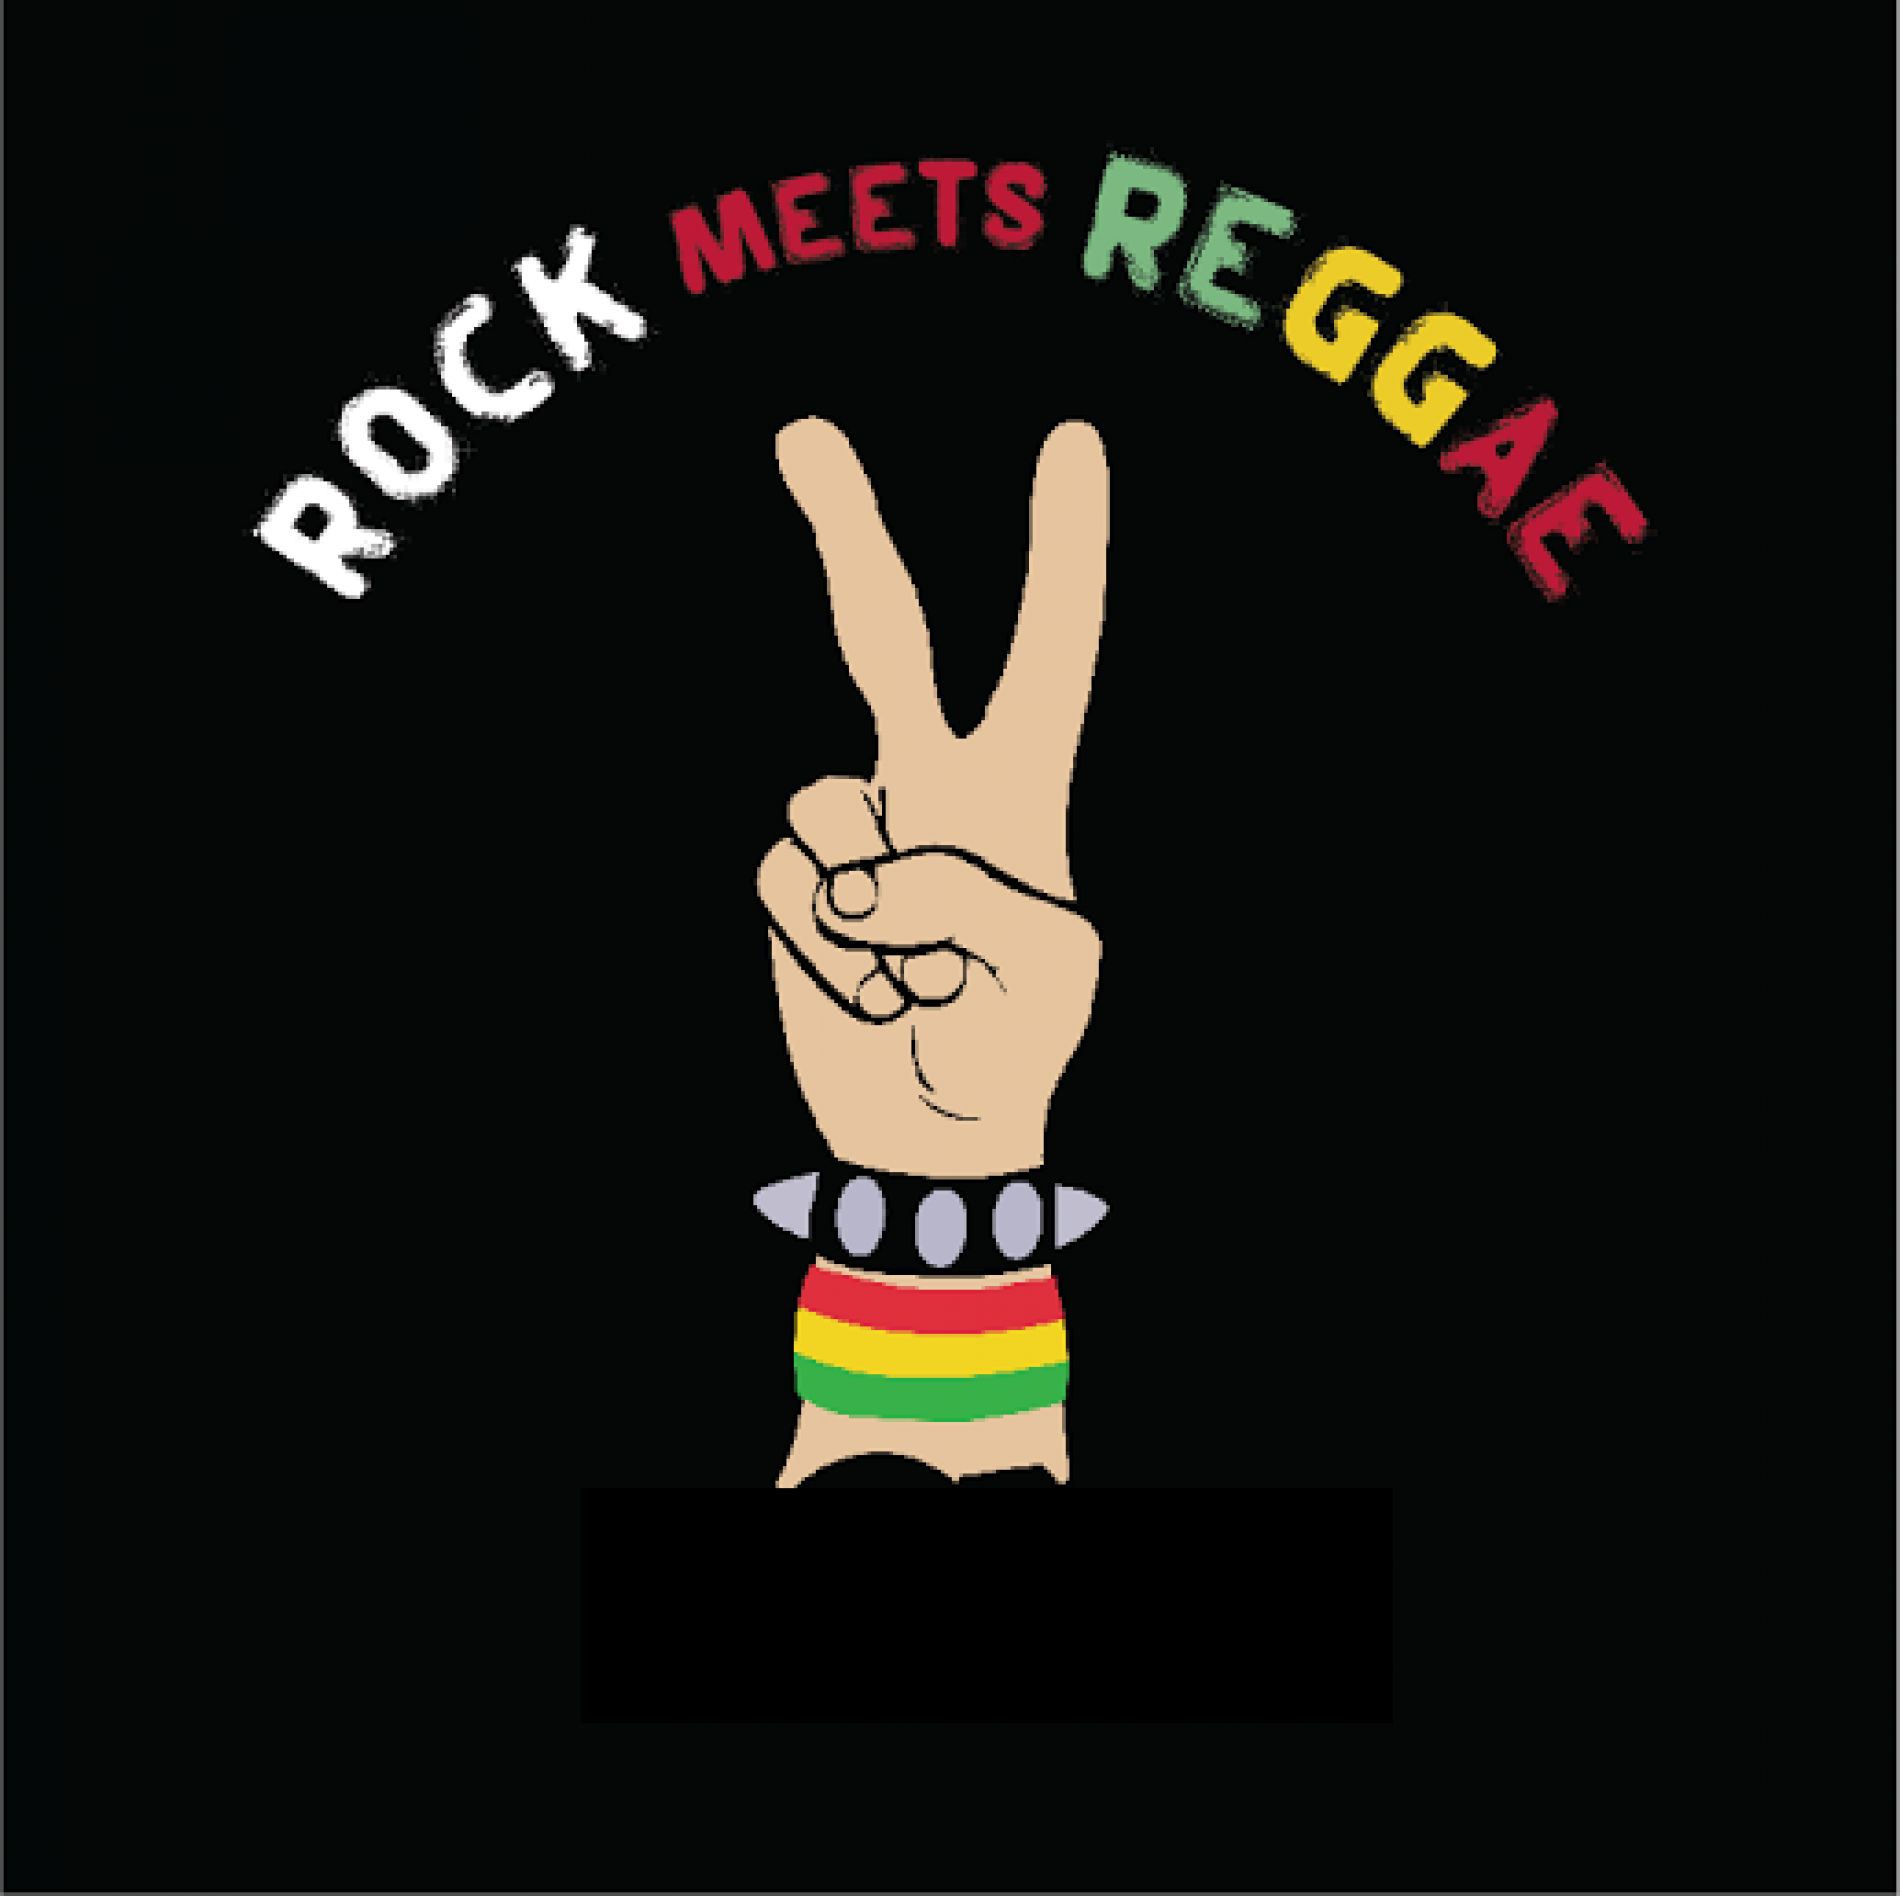 Rock Meets Reggae: The Announcement For 2016 Is Here